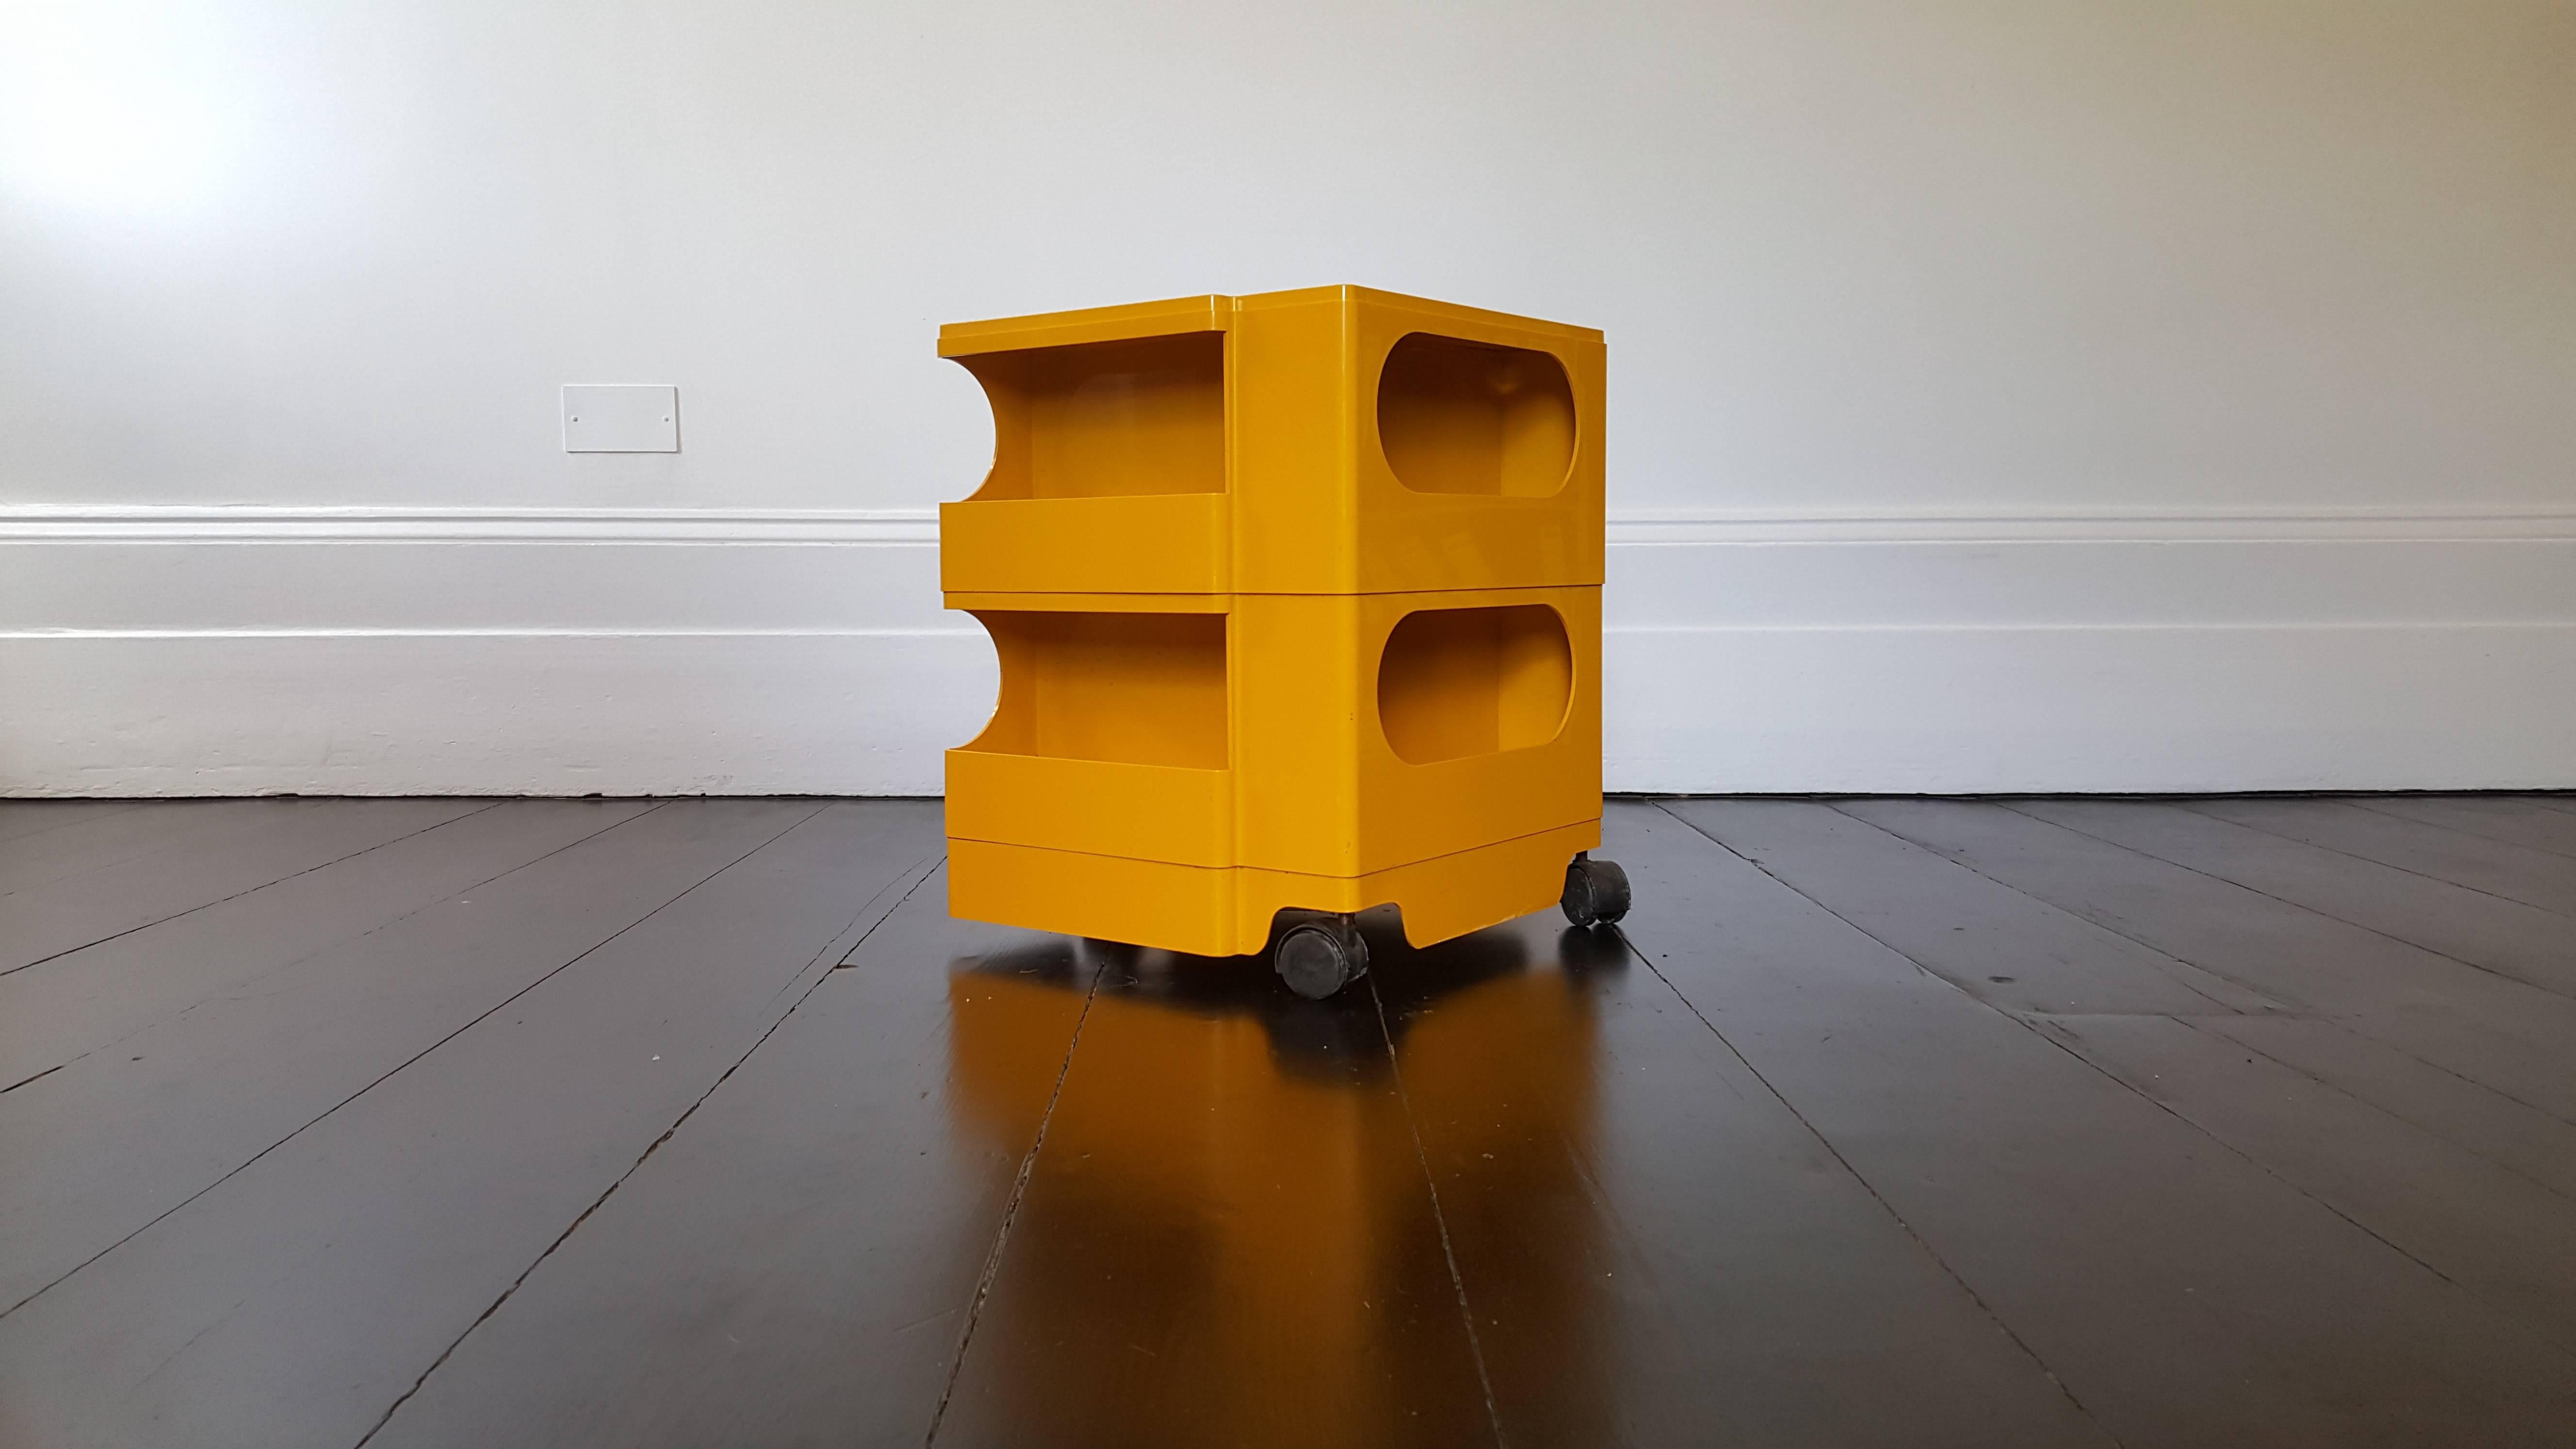 A Vintage Italian 'Boby' Trolley Storage Unit by Joe Colombo for Bieffeplast
 
The Boby portable storage unit was designed by Joe Colombo and launched in 1970. Amongst many awards its received its first was at SMAU in 1971, it is part of the